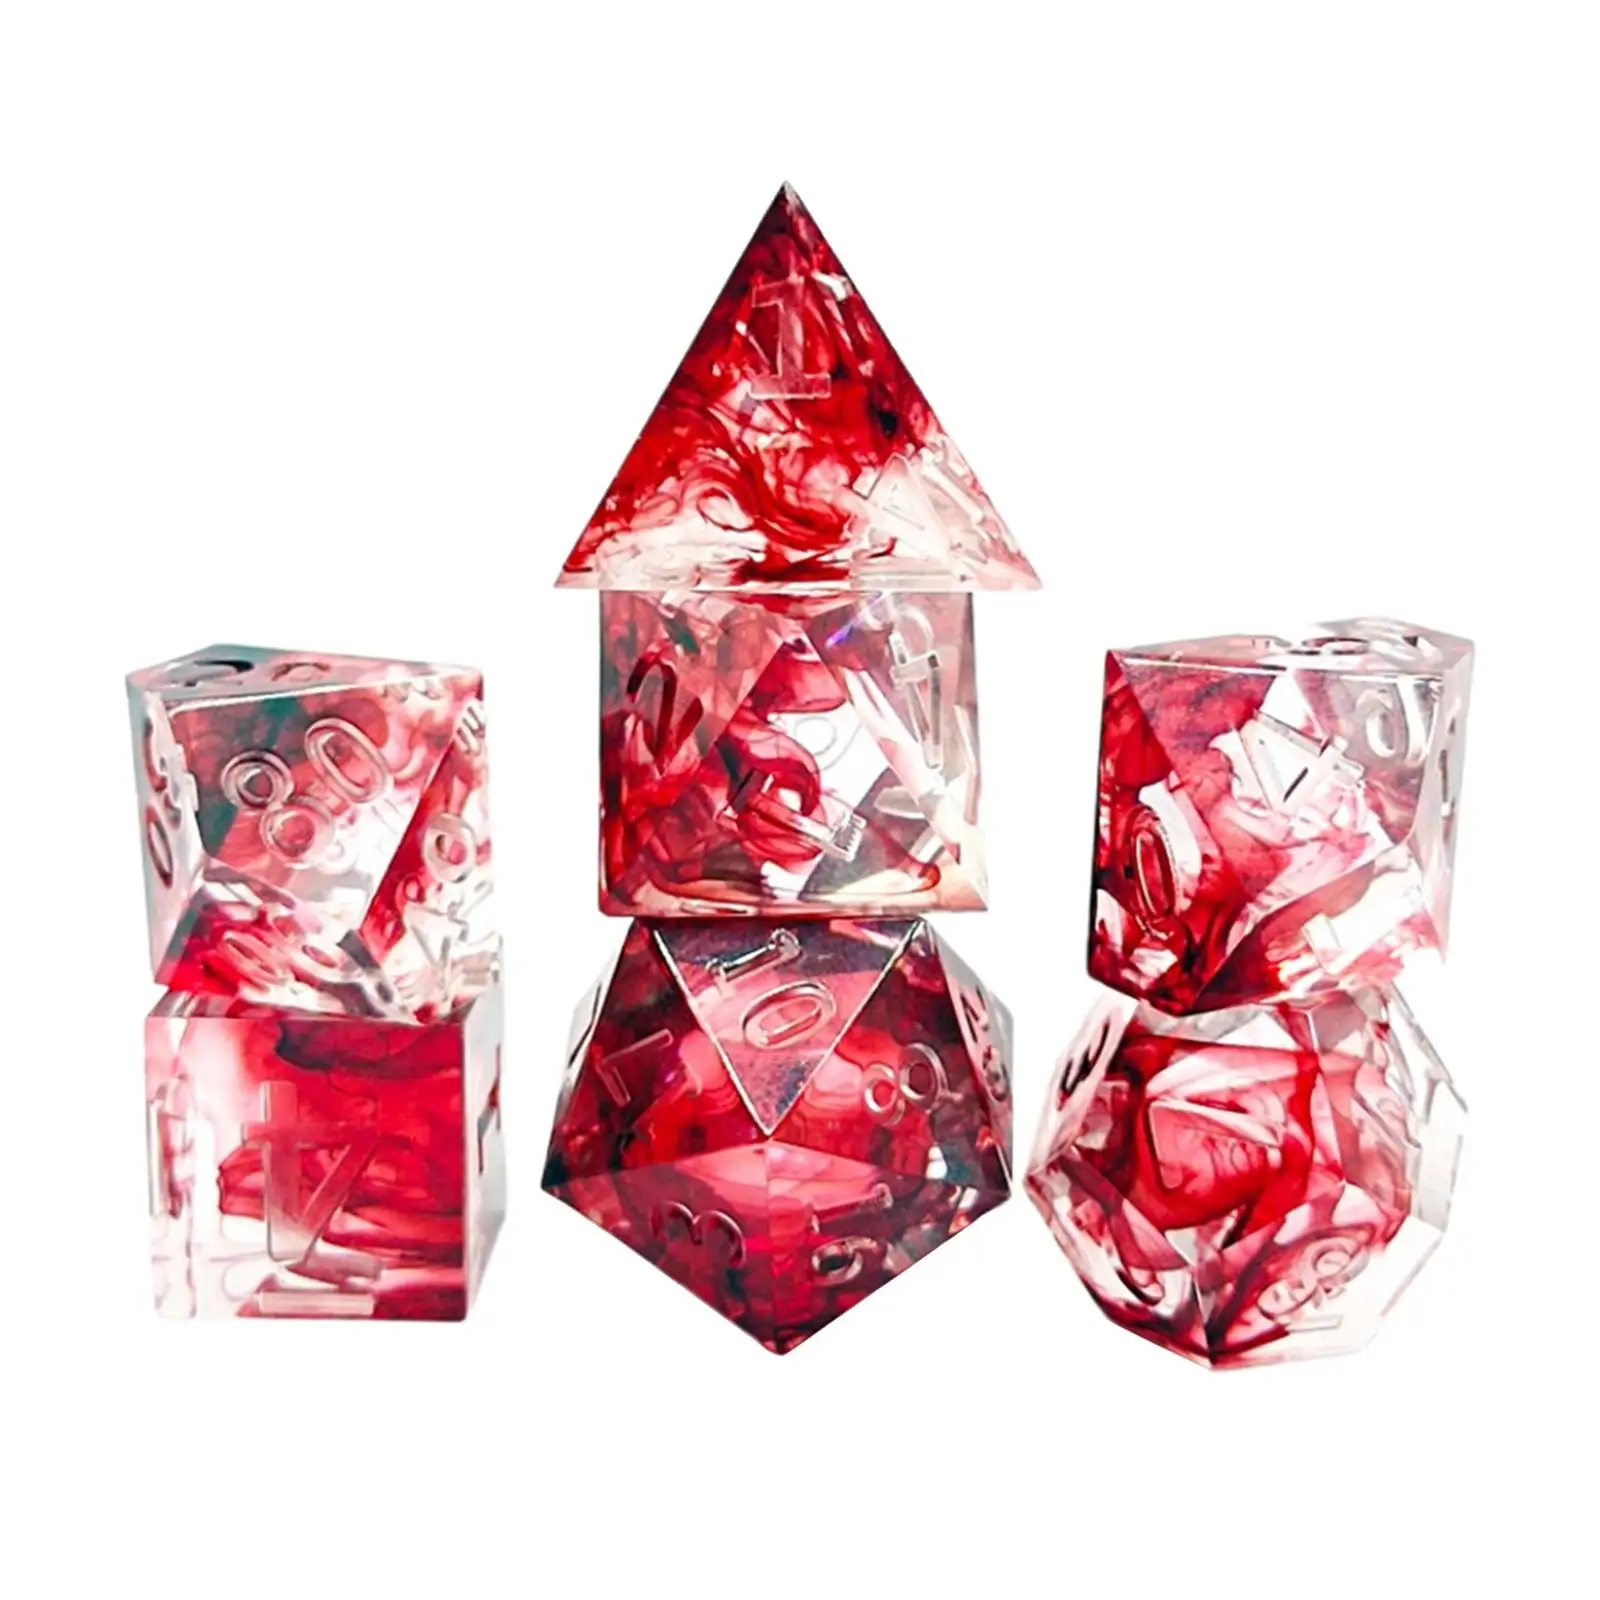 Pack of 7 Polyhedral Dice Crystal RPG Role Playing Dice Blood Effect Acute Angle for Shadow Run RPG Dices Game Accessories